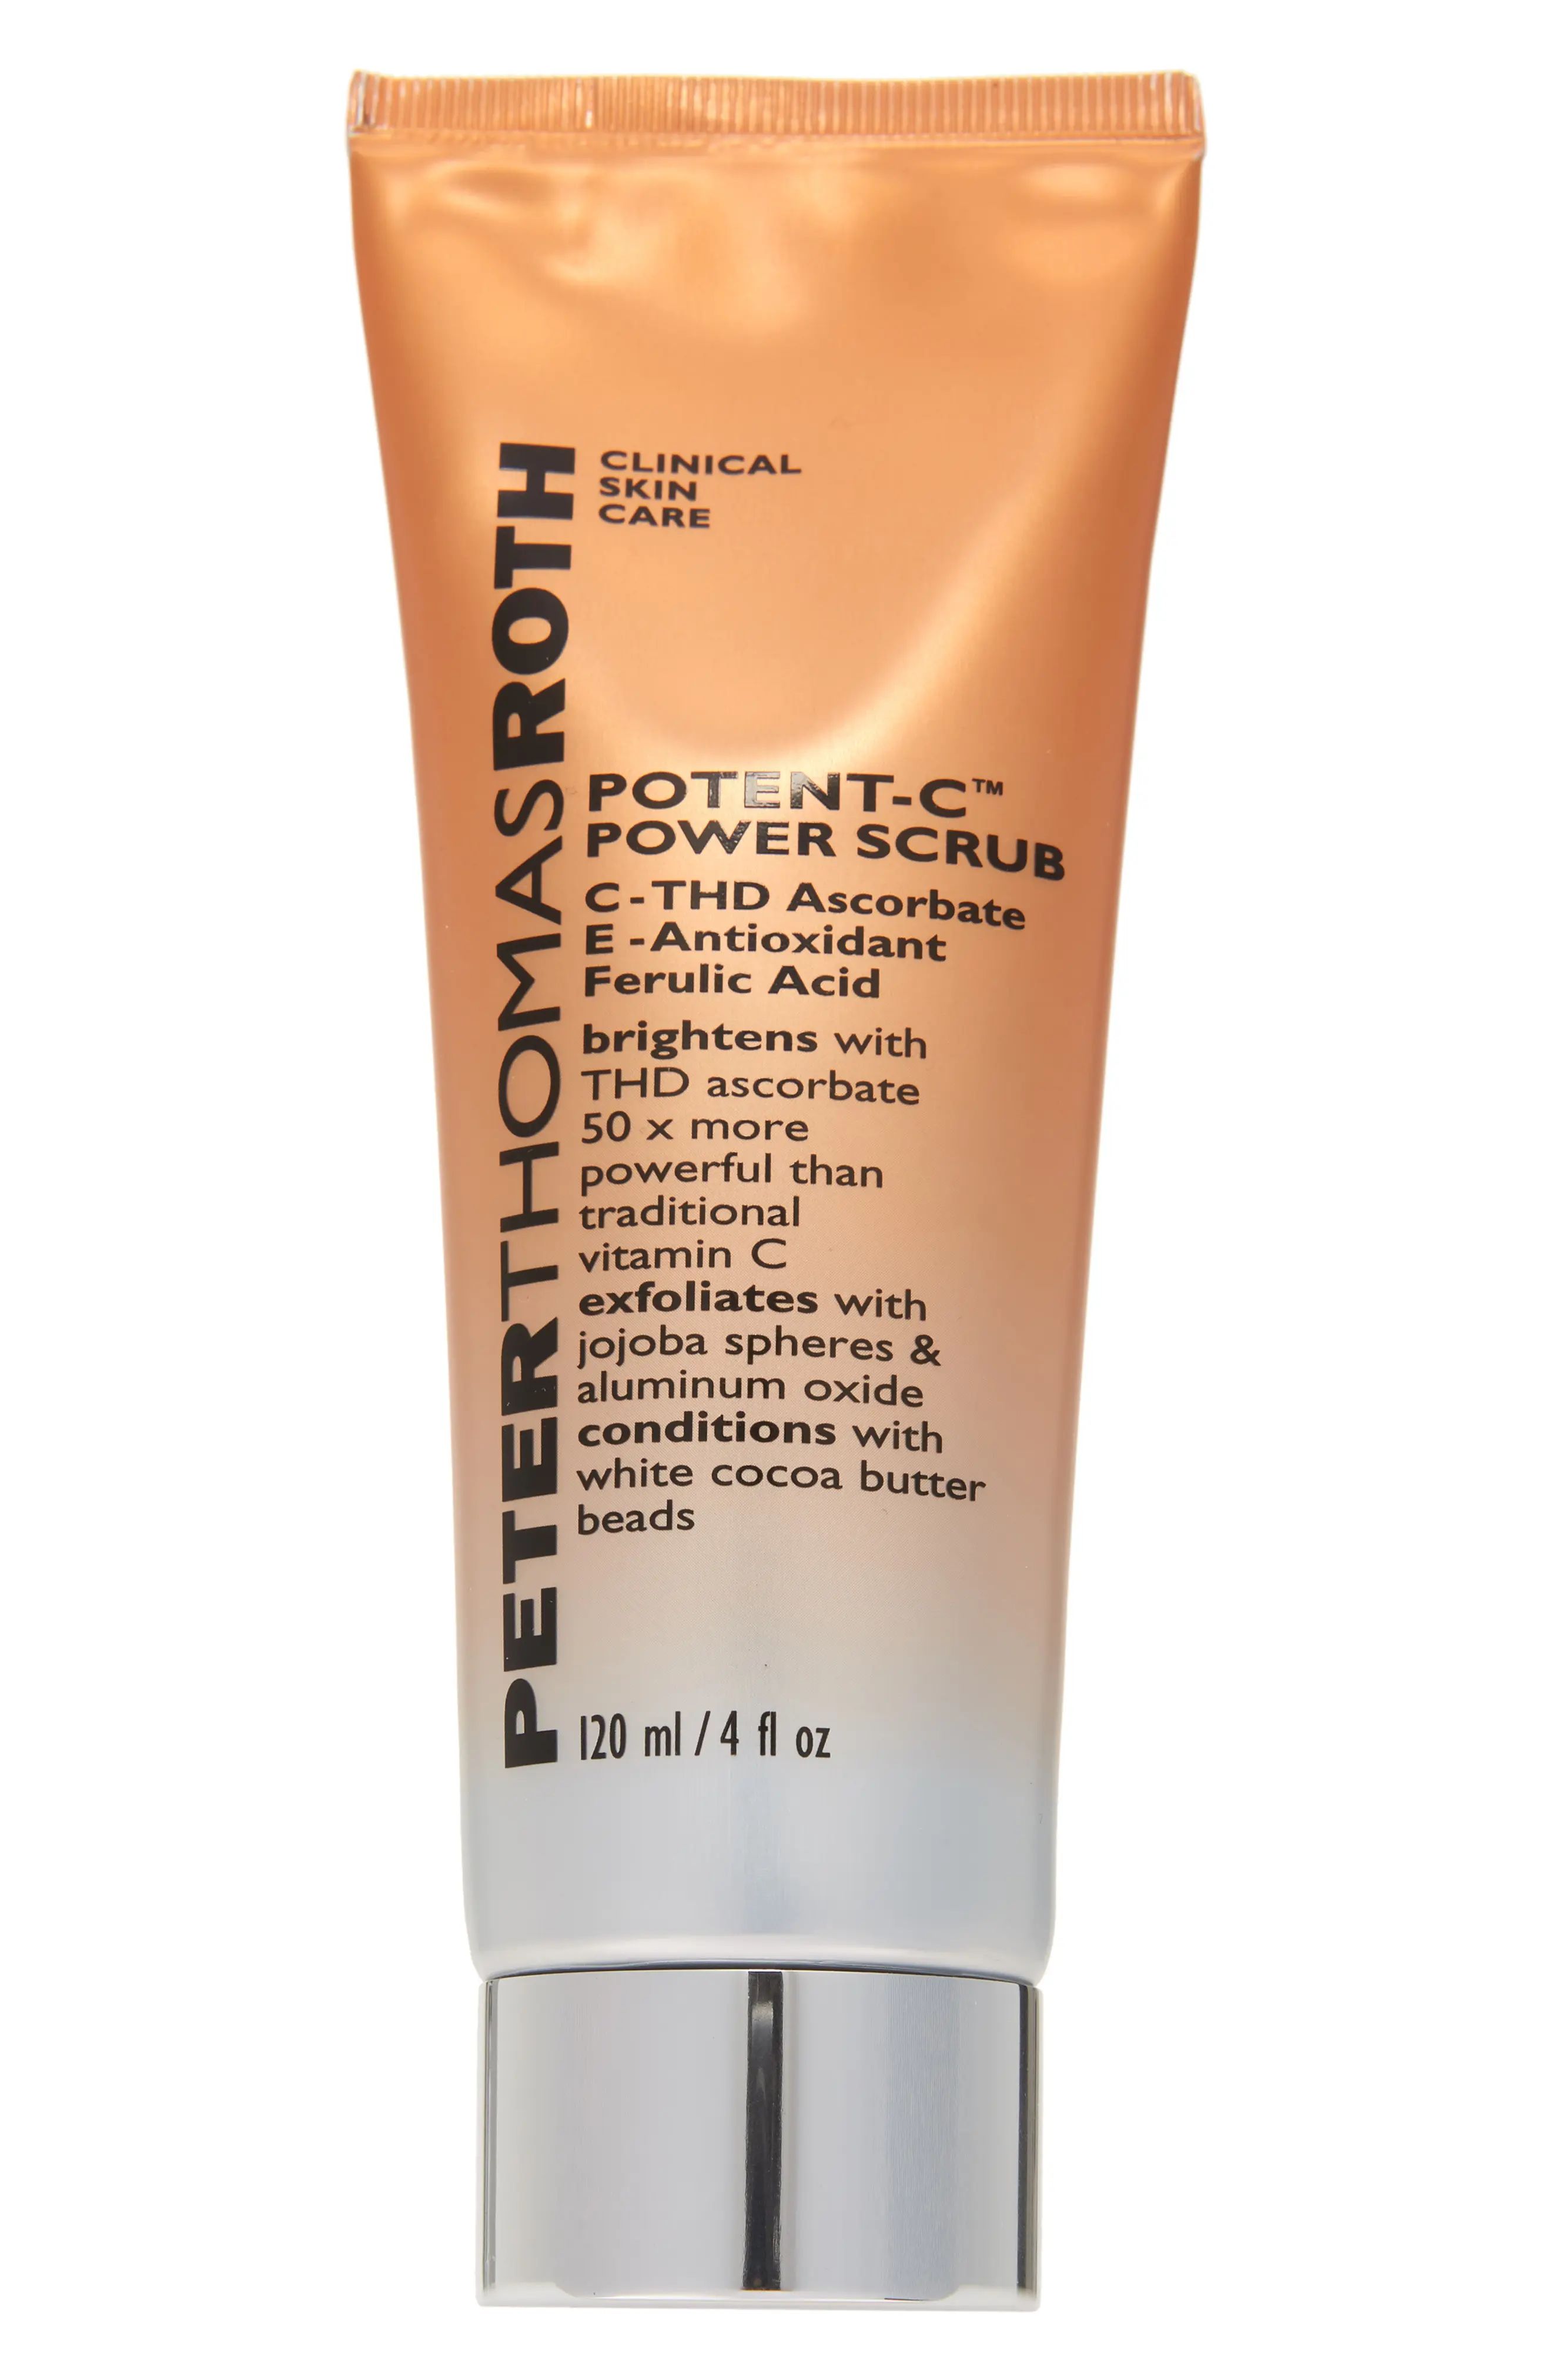 Peter Thomas Roth Potent C Power Scrub at Nordstrom | Nordstrom